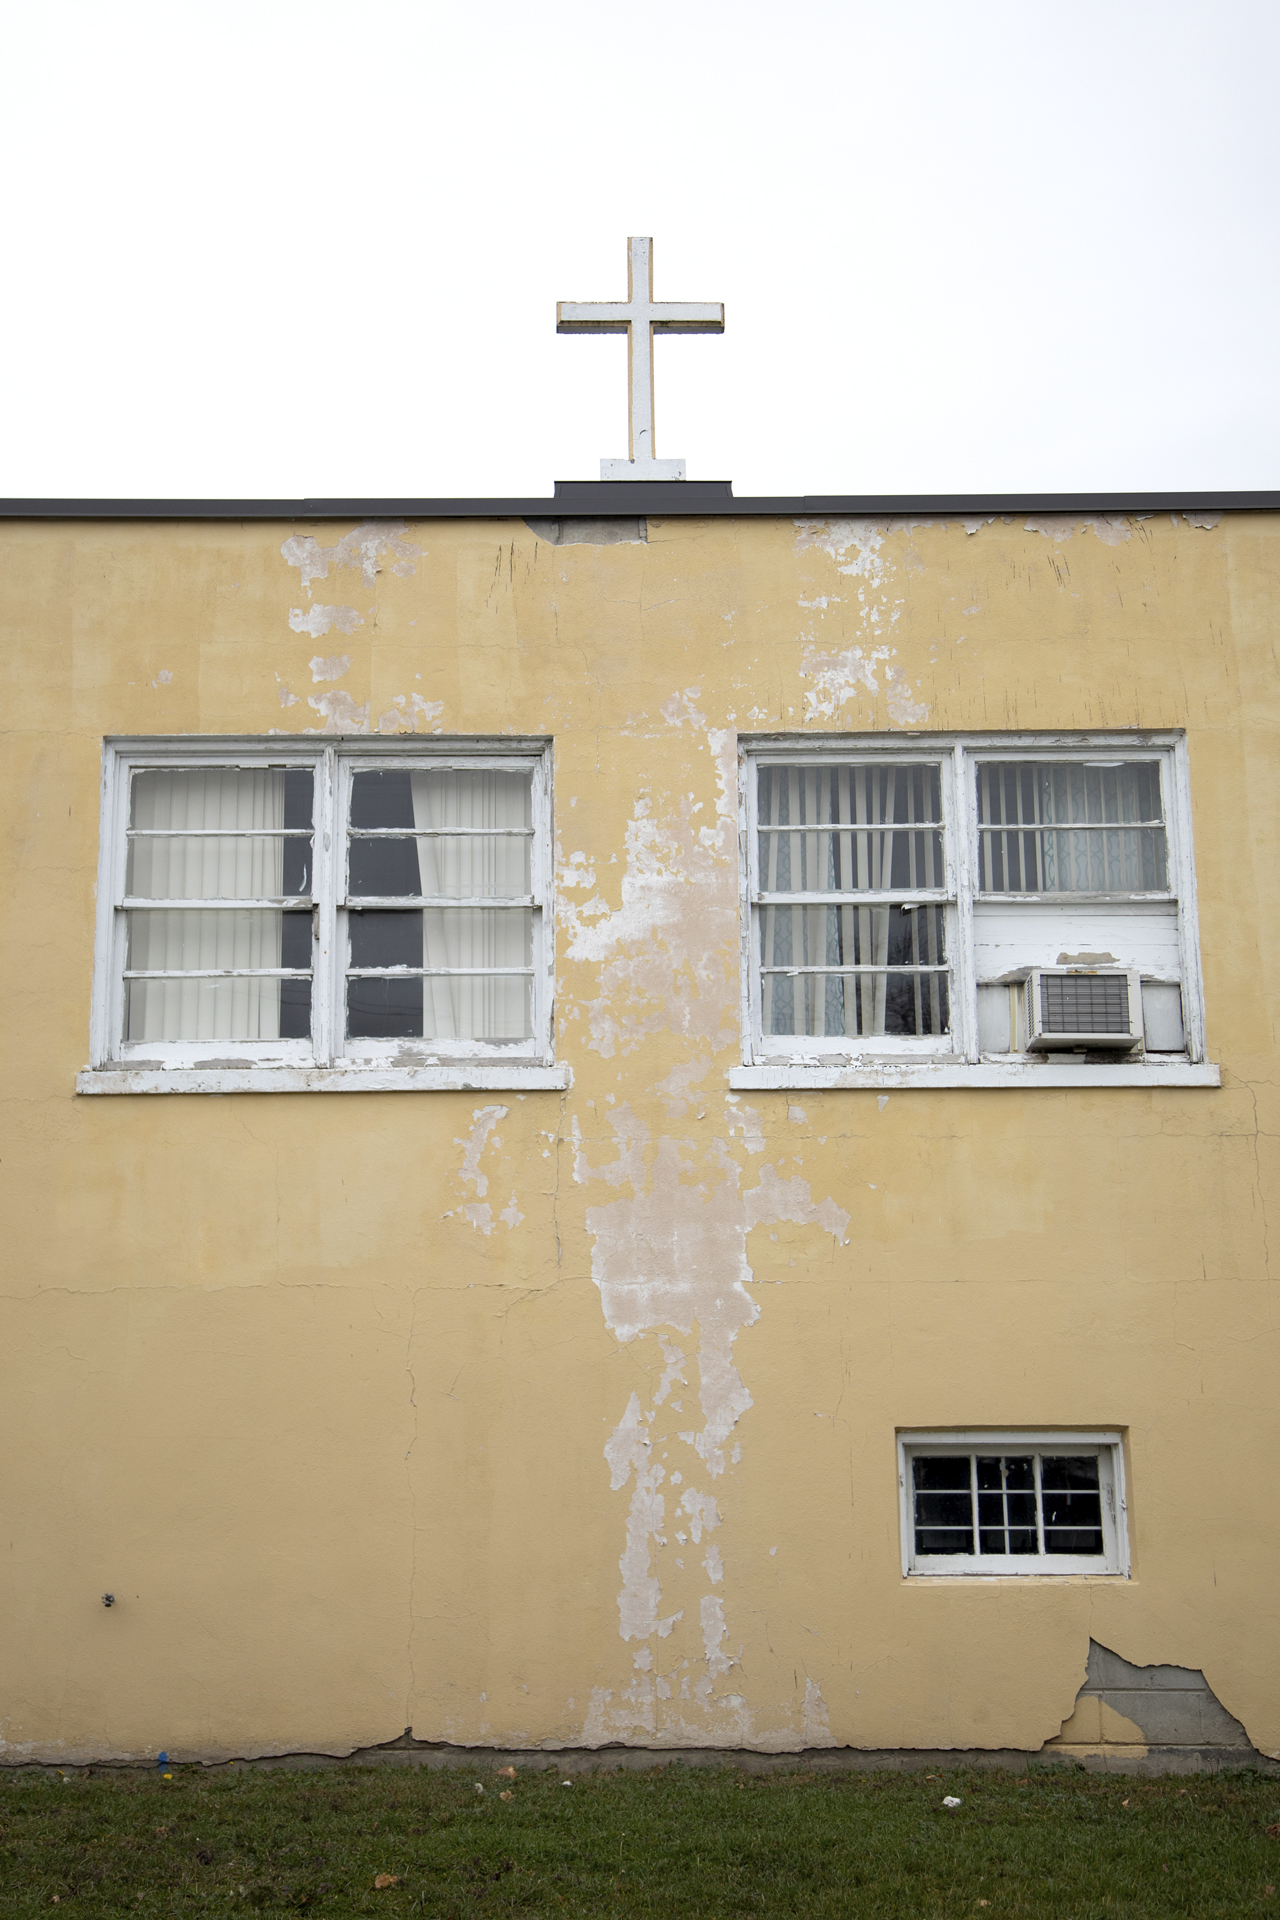 An old beige building with a cross on the roof. The wall is cracked and decaying.